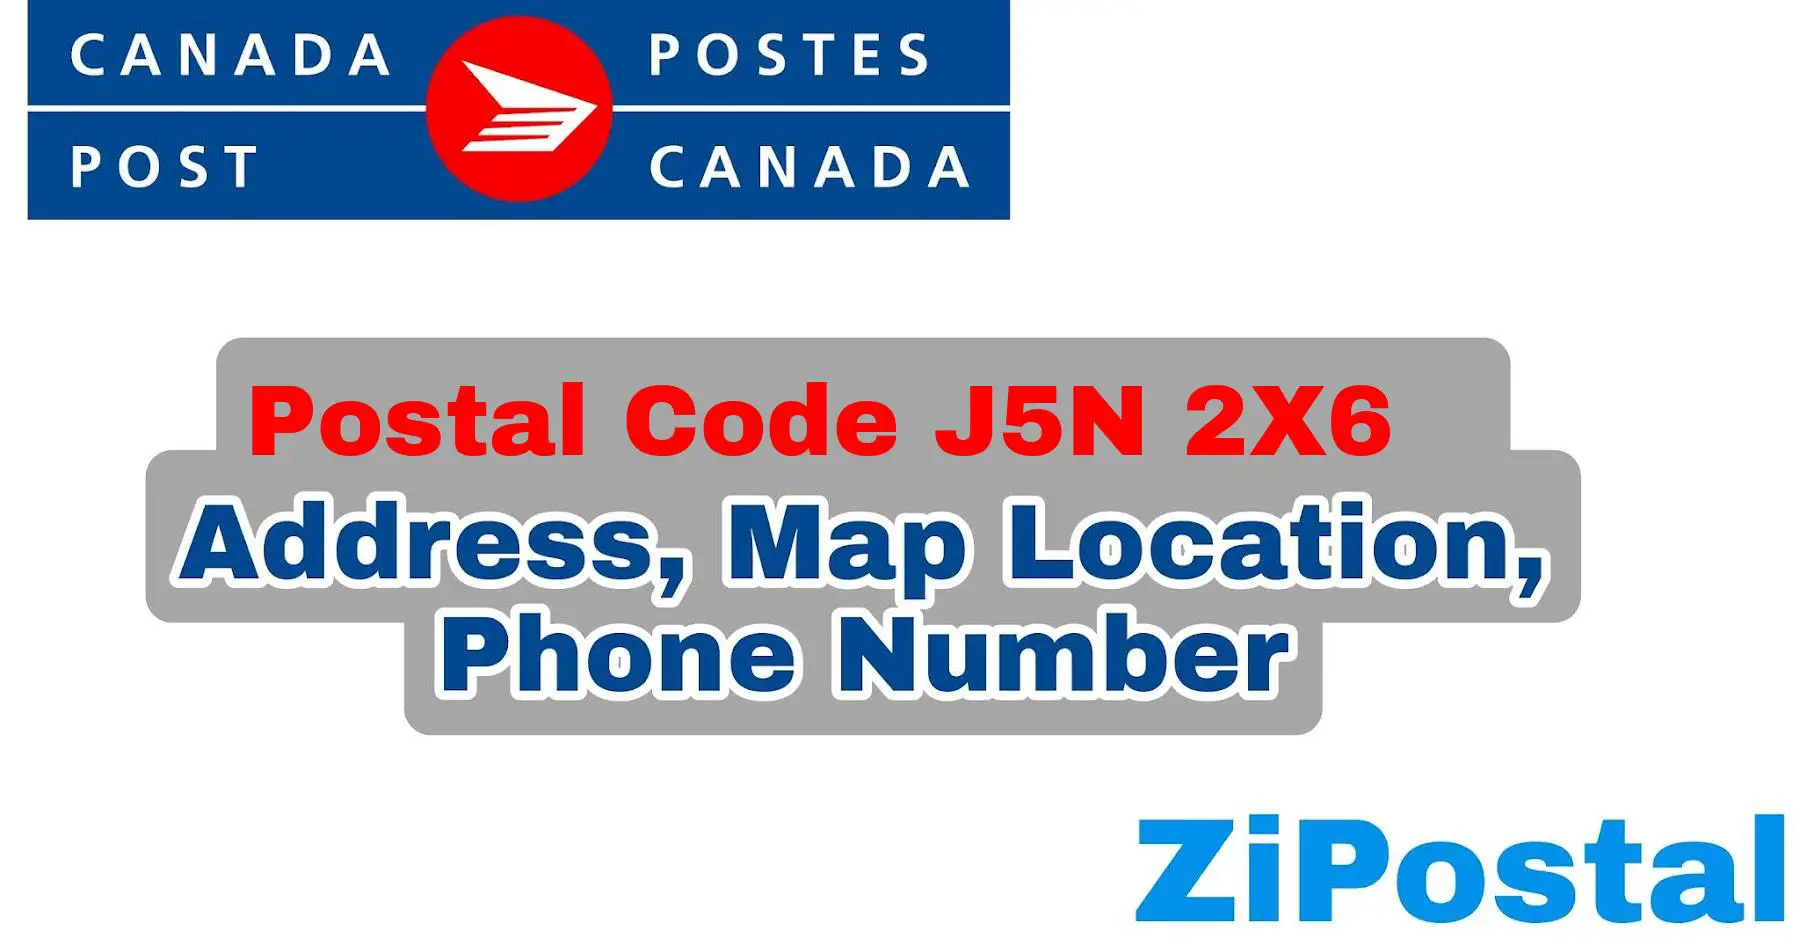 Postal Code J5N 2X6 Address Map Location and Phone Number